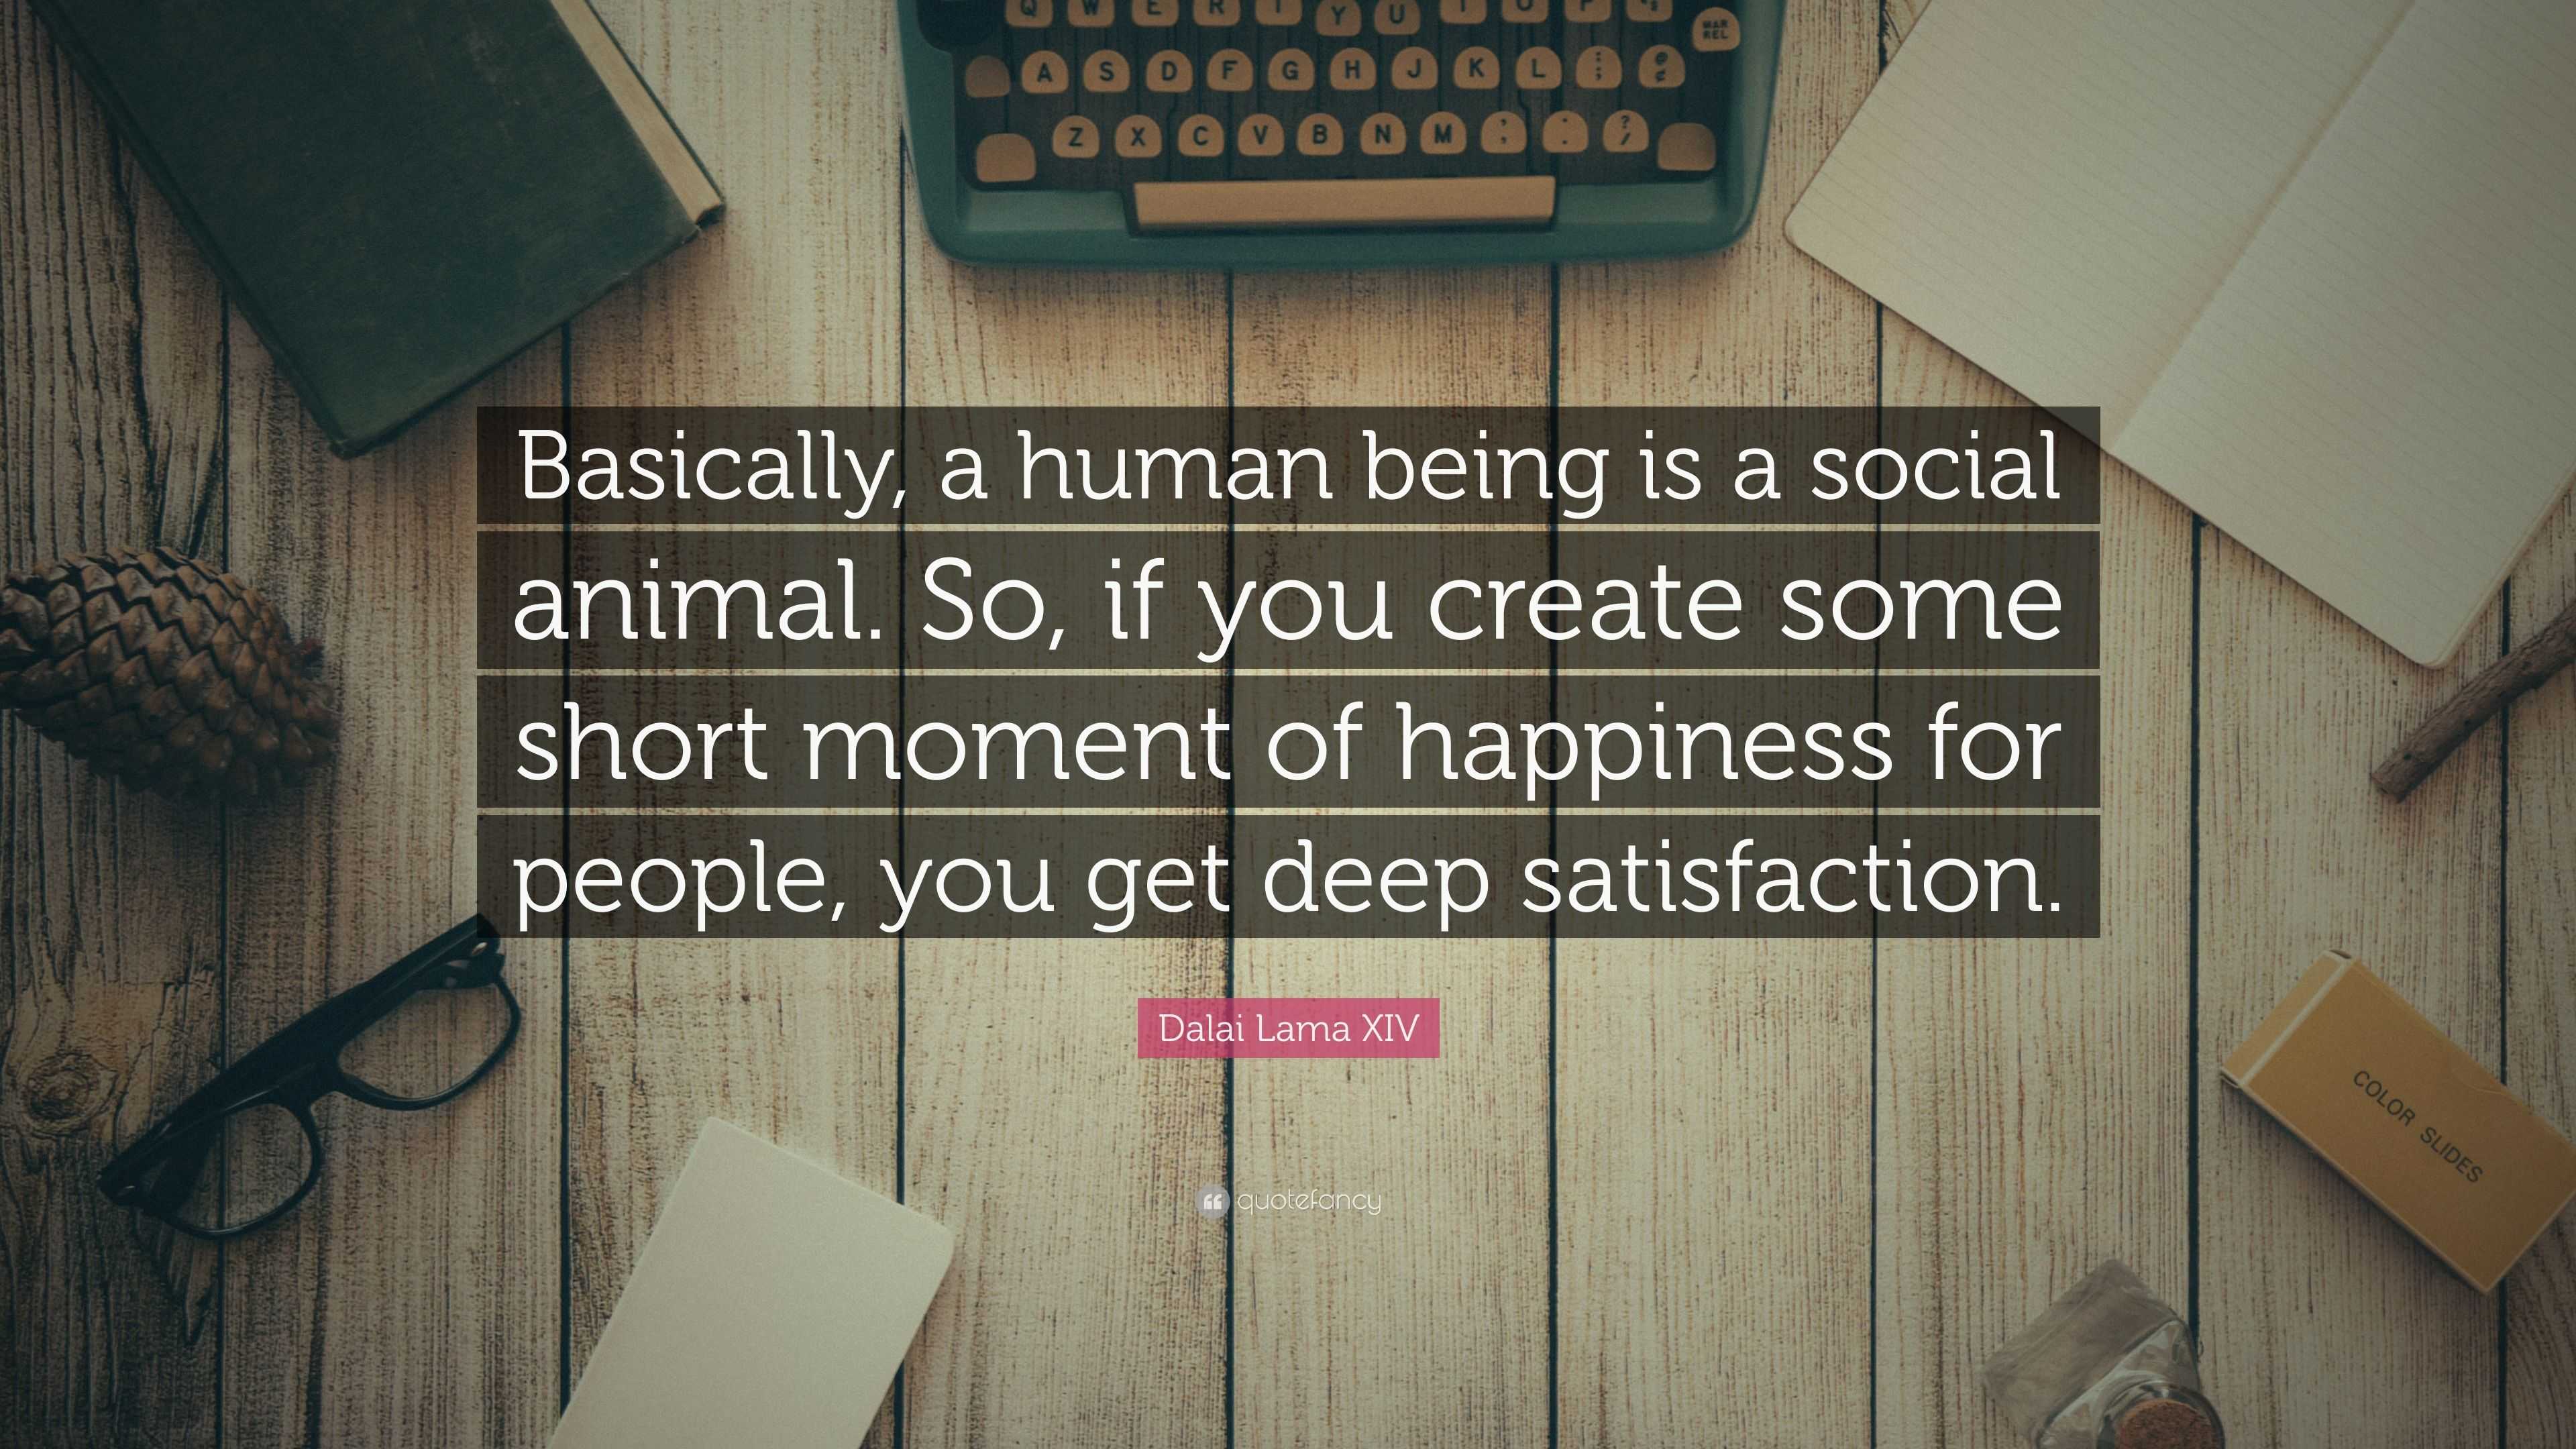 Dalai Lama XIV Quote: “Basically, a human being is a social animal. So, if  you create some short moment of happiness for people, you get deep s...”